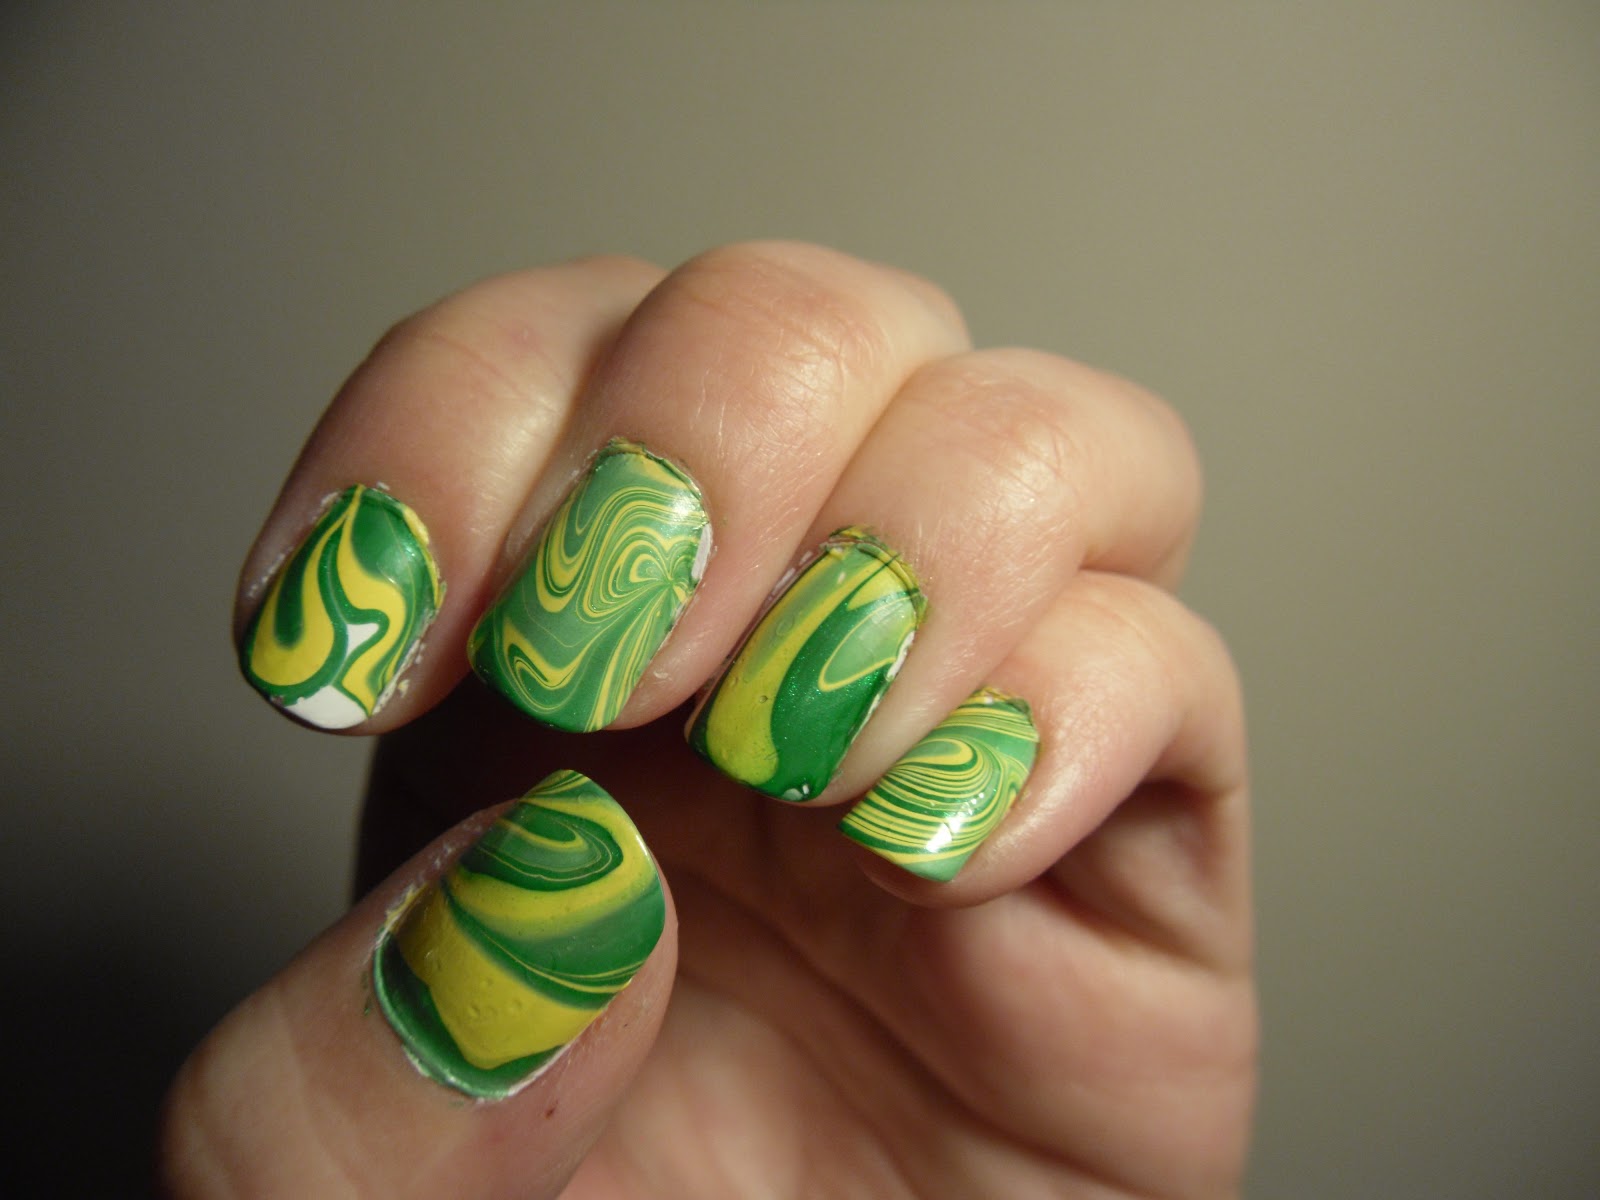 6. "Nail Art Swag Tumblr" - The Best Swag Nail Products to Elevate Your Manicure Game - wide 7